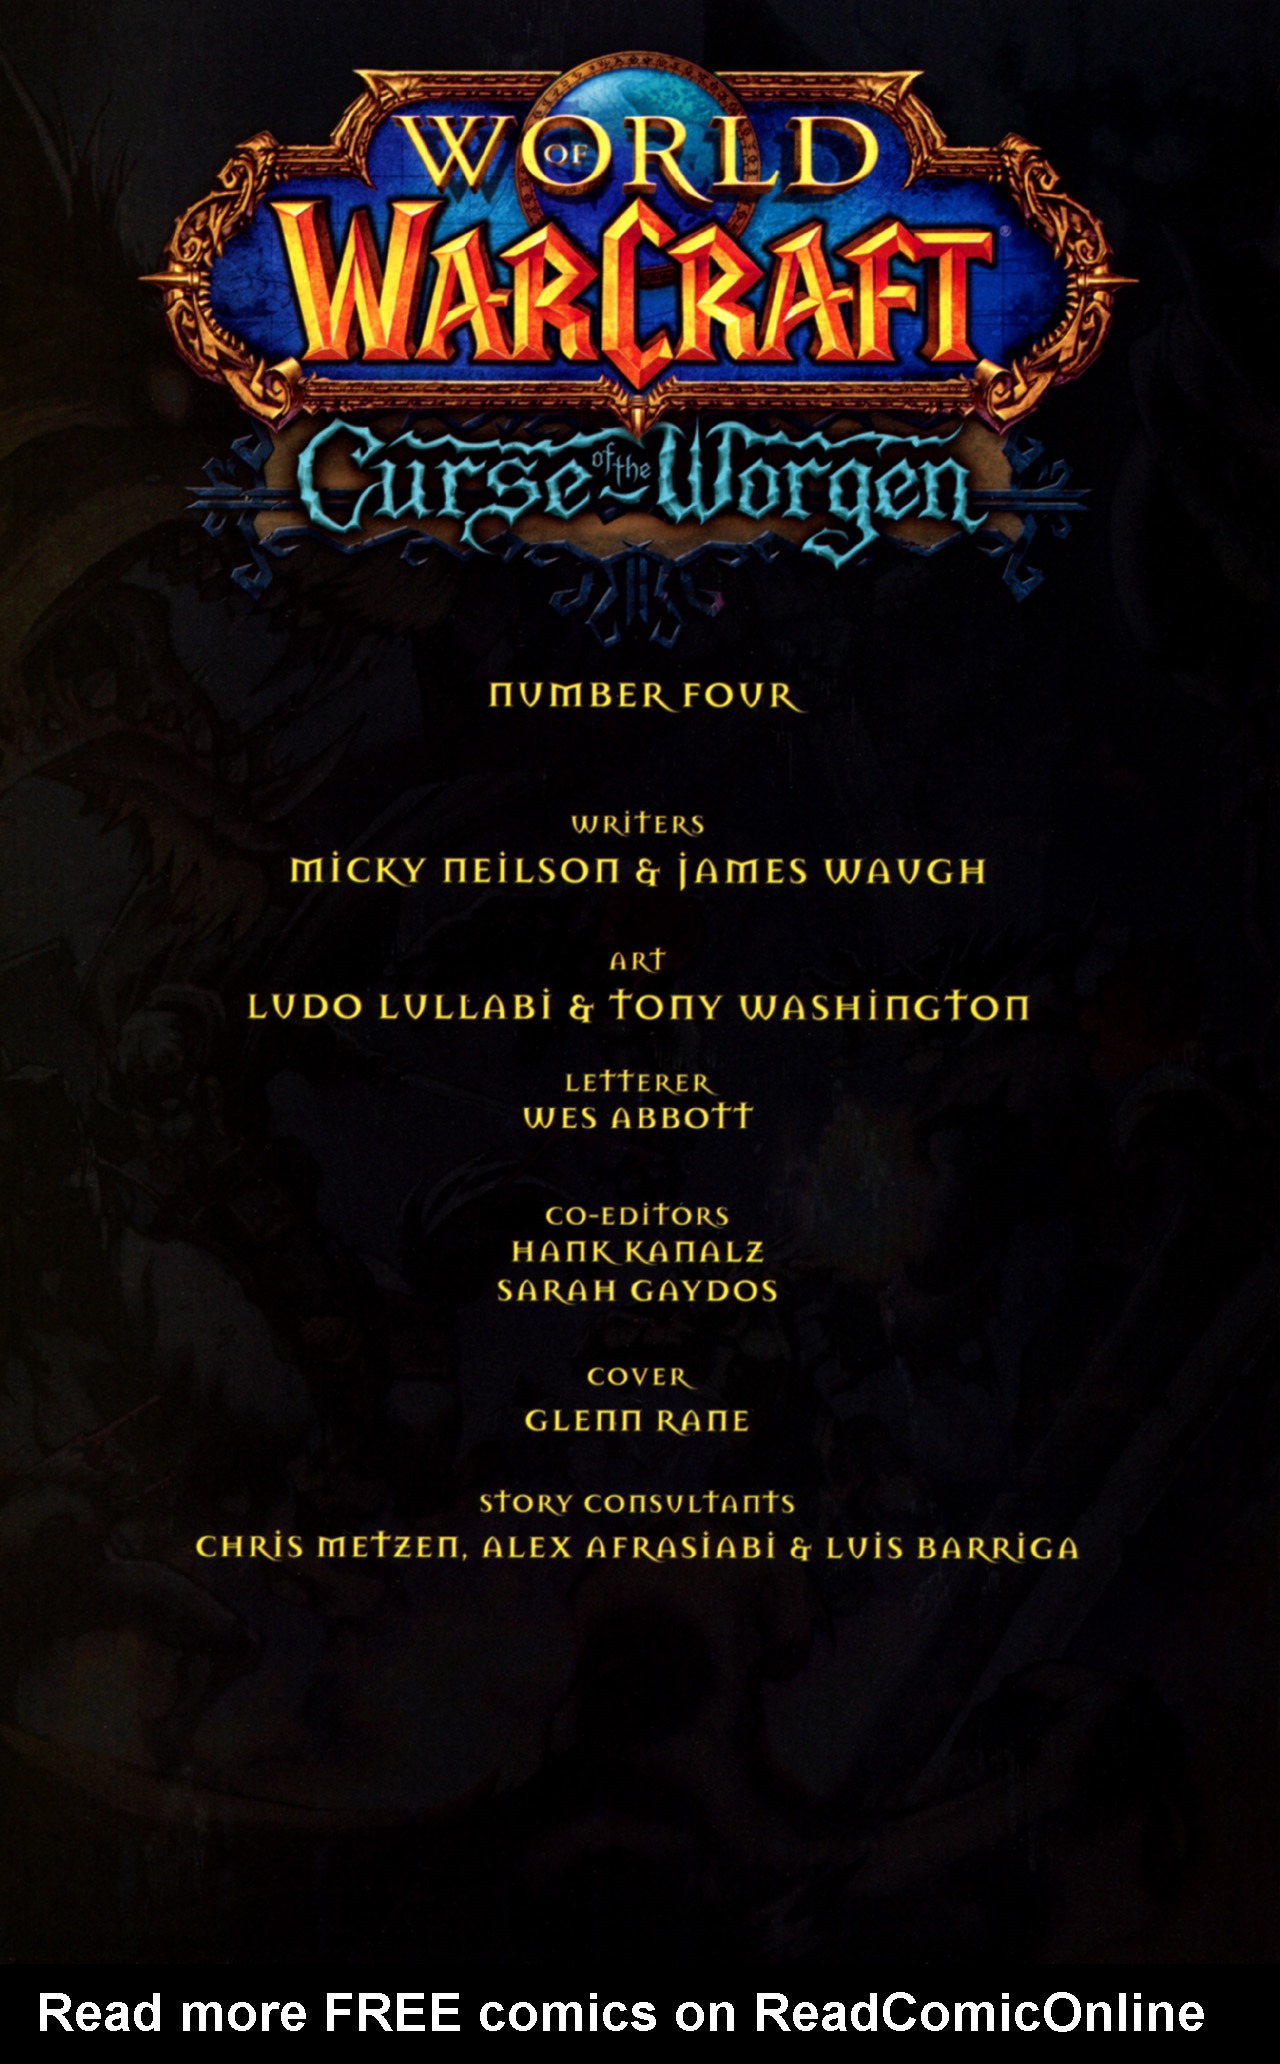 Read online World of Warcraft: Curse of the Worgen comic -  Issue #4 - 2